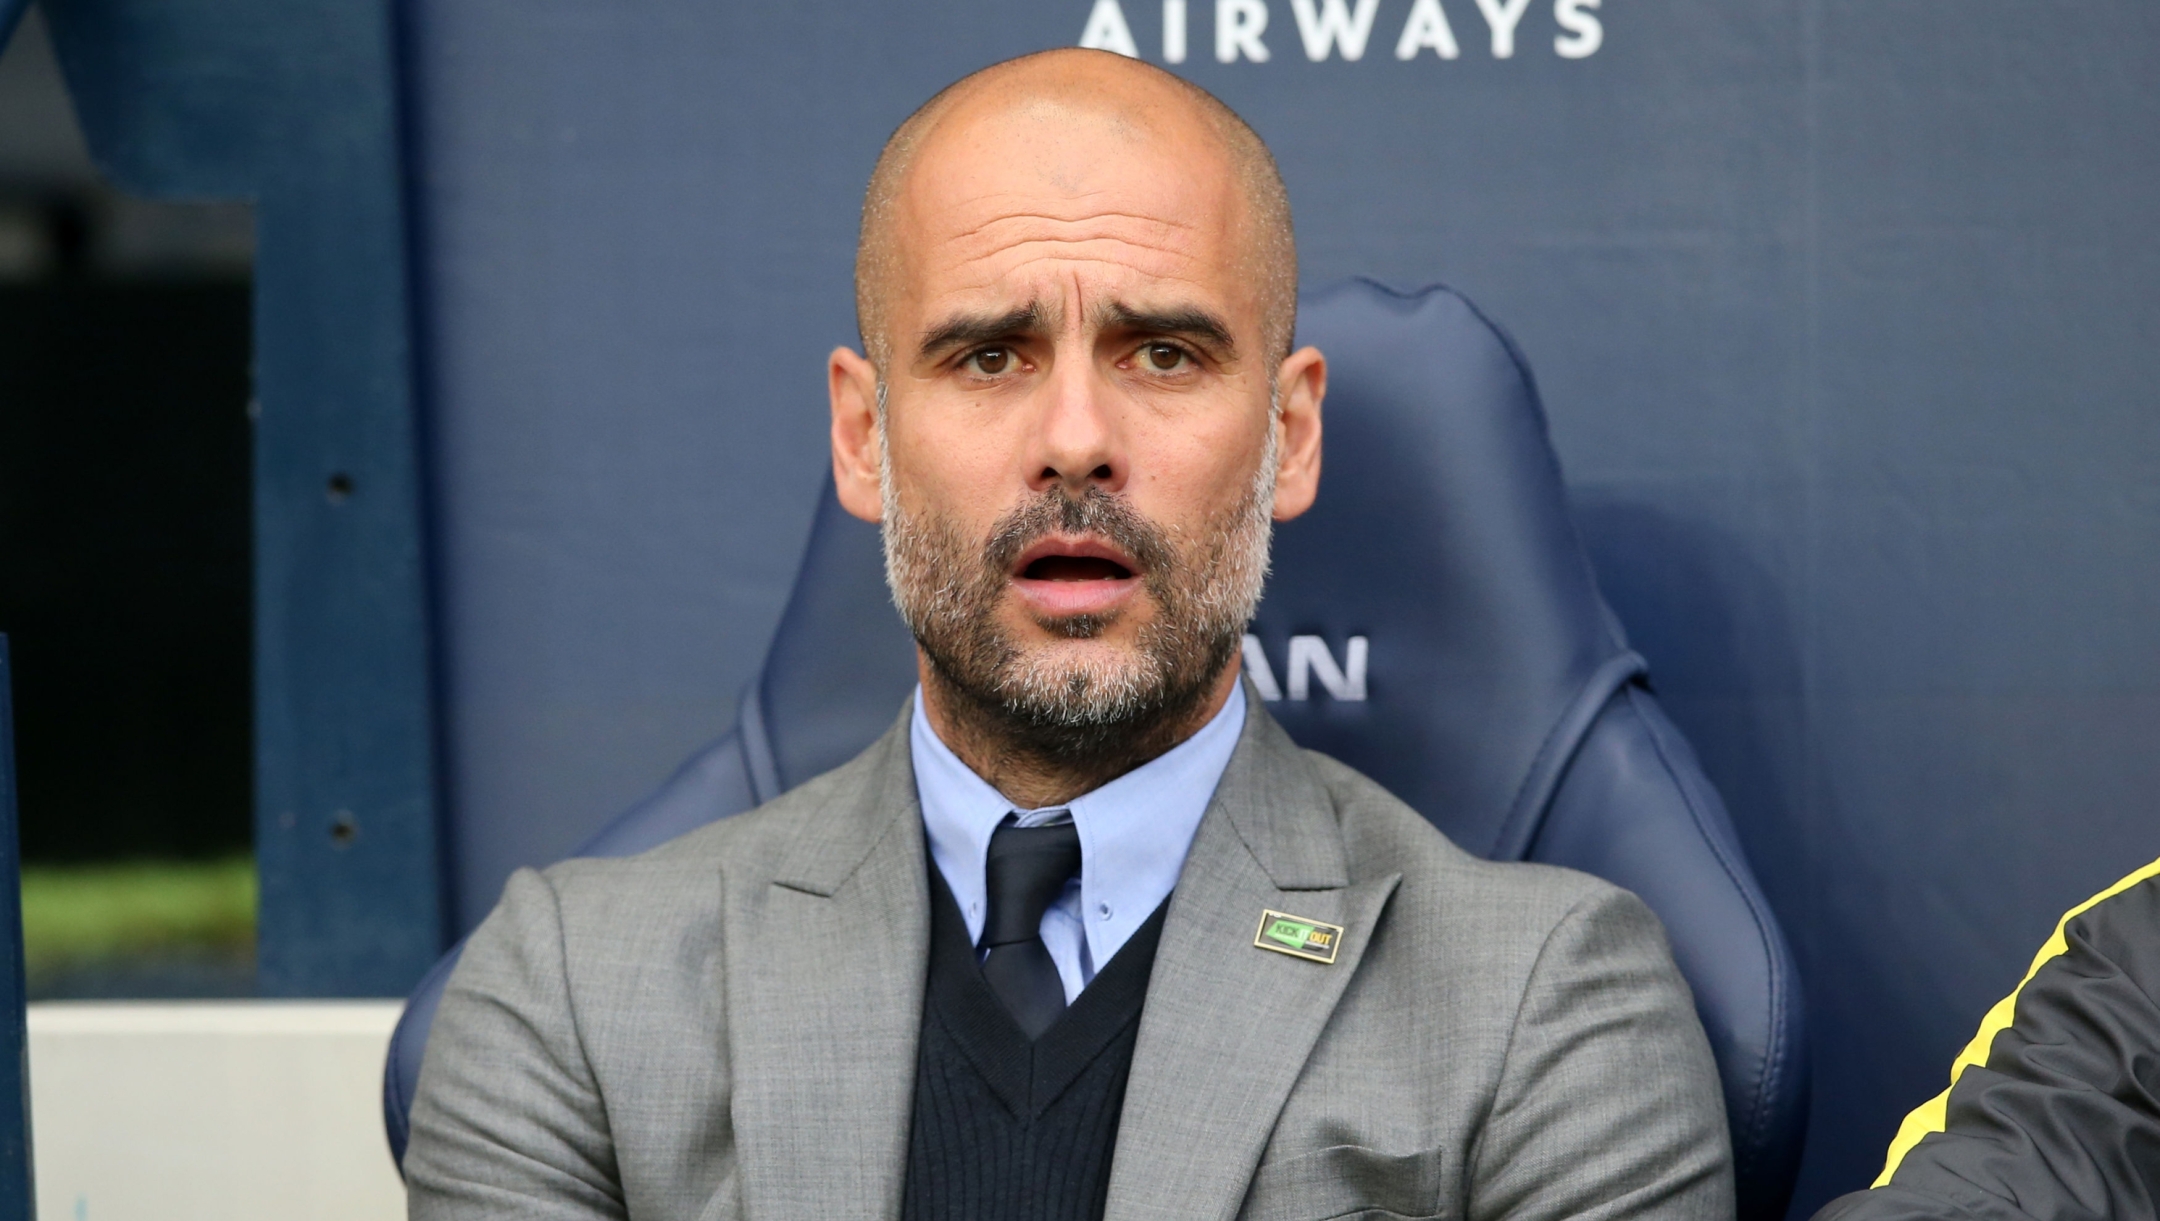 Manchester City manager Pep Guardiola before the Premier League match at the Etihad Stadium, Manchester. PRESS ASSOCIATION Photo. Picture date:  Tuesday May 16, 2017. See PA story SOCCER Man City. Photo credit should read: Martin Rickett/PA Wire. RESTRICTIONS: EDITORIAL USE ONLY No use with unauthorised audio, video, data, fixture lists, club/league logos or "live" services. Online in-match use limited to 75 images, no video emulation. No use in betting, games or single club/league/player publications.